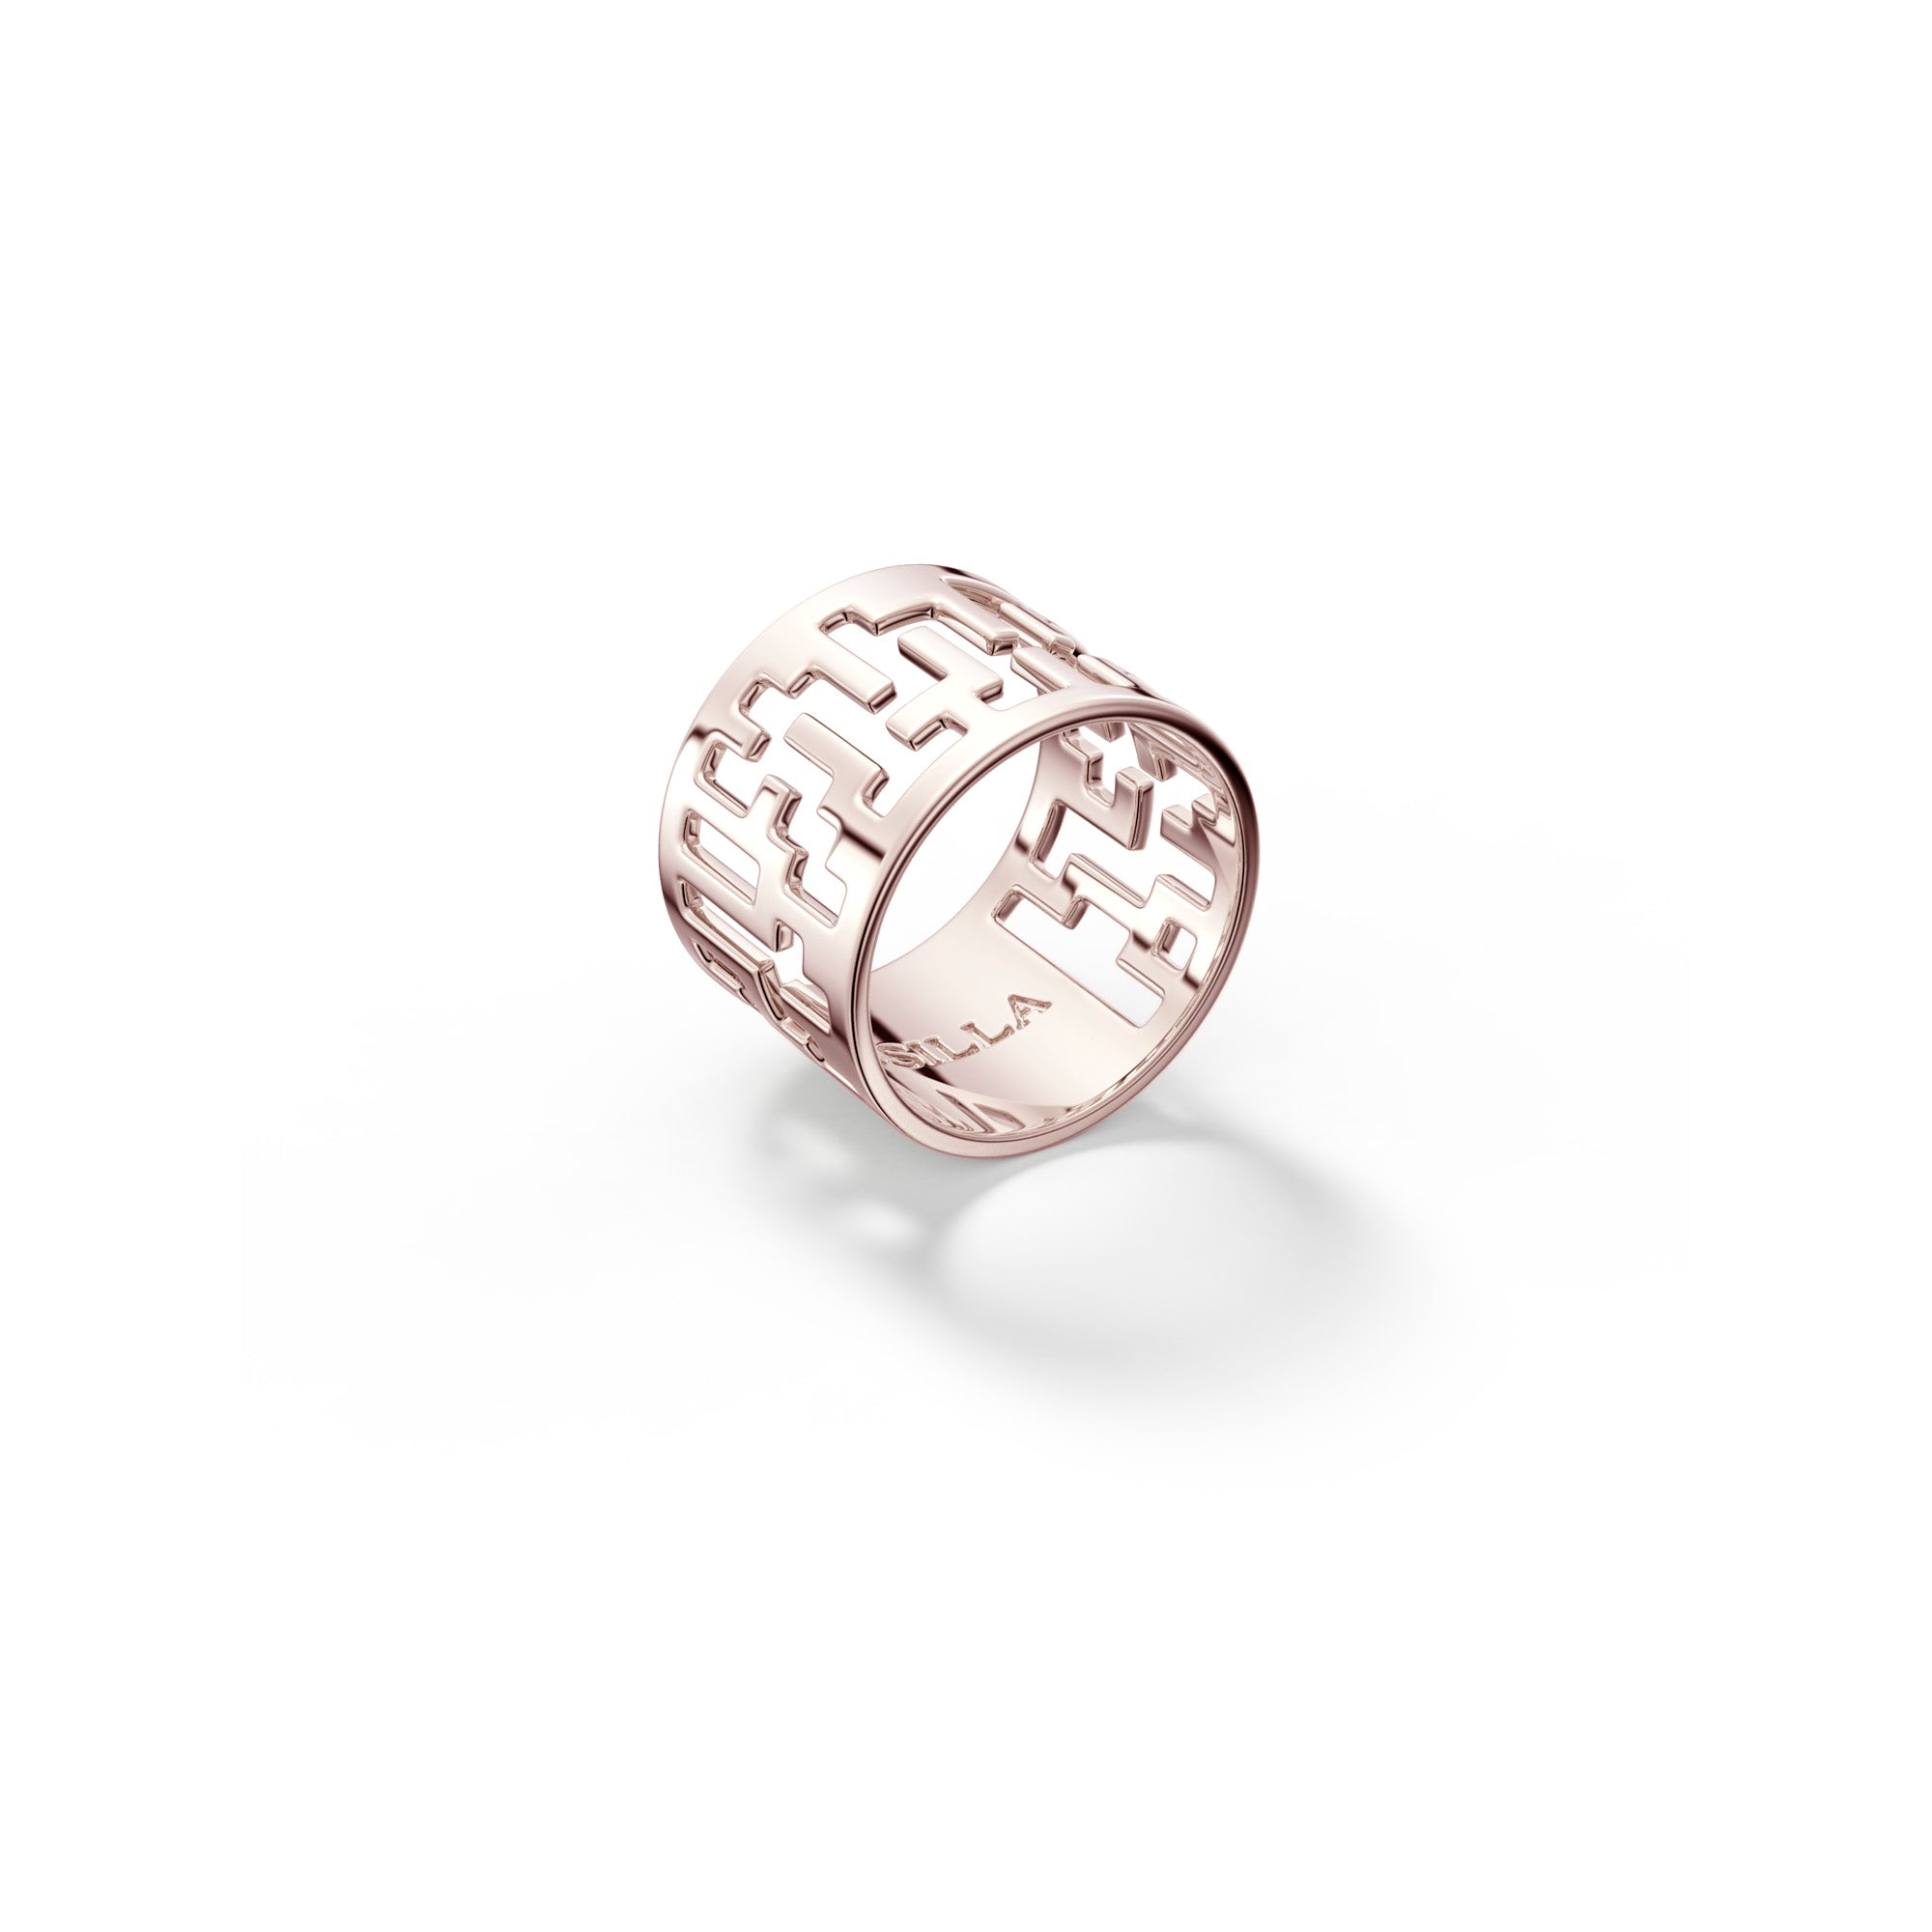 'A-Māz-Me' Icy Yellow Gold Ring